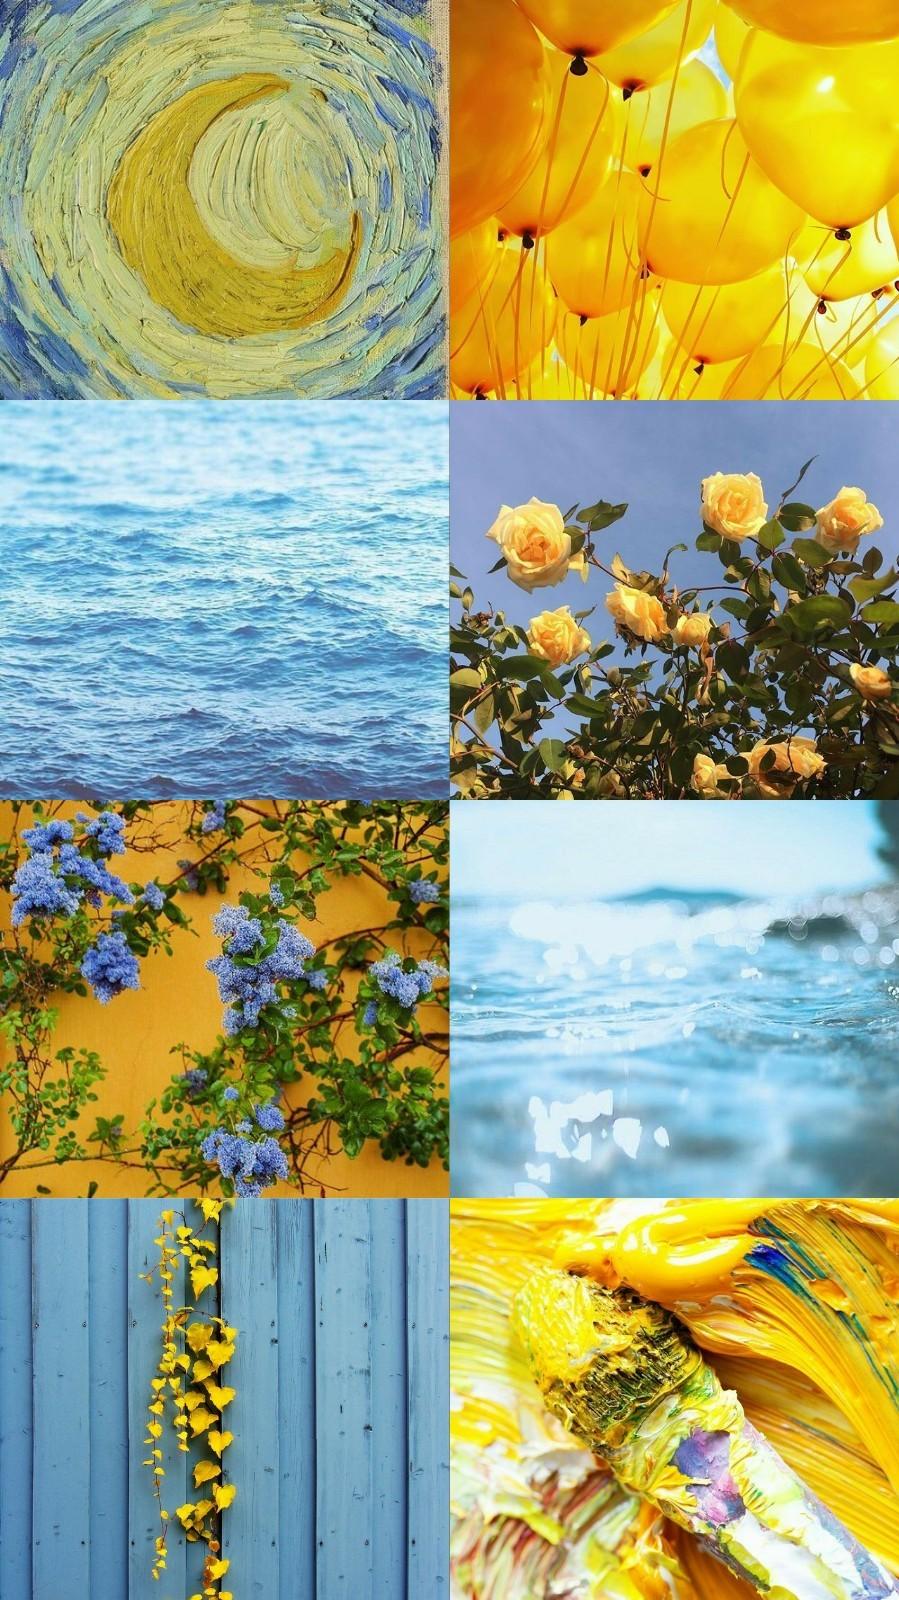 Blue And Yellow Aesthetic Wallpapers - Wallpaper Cave